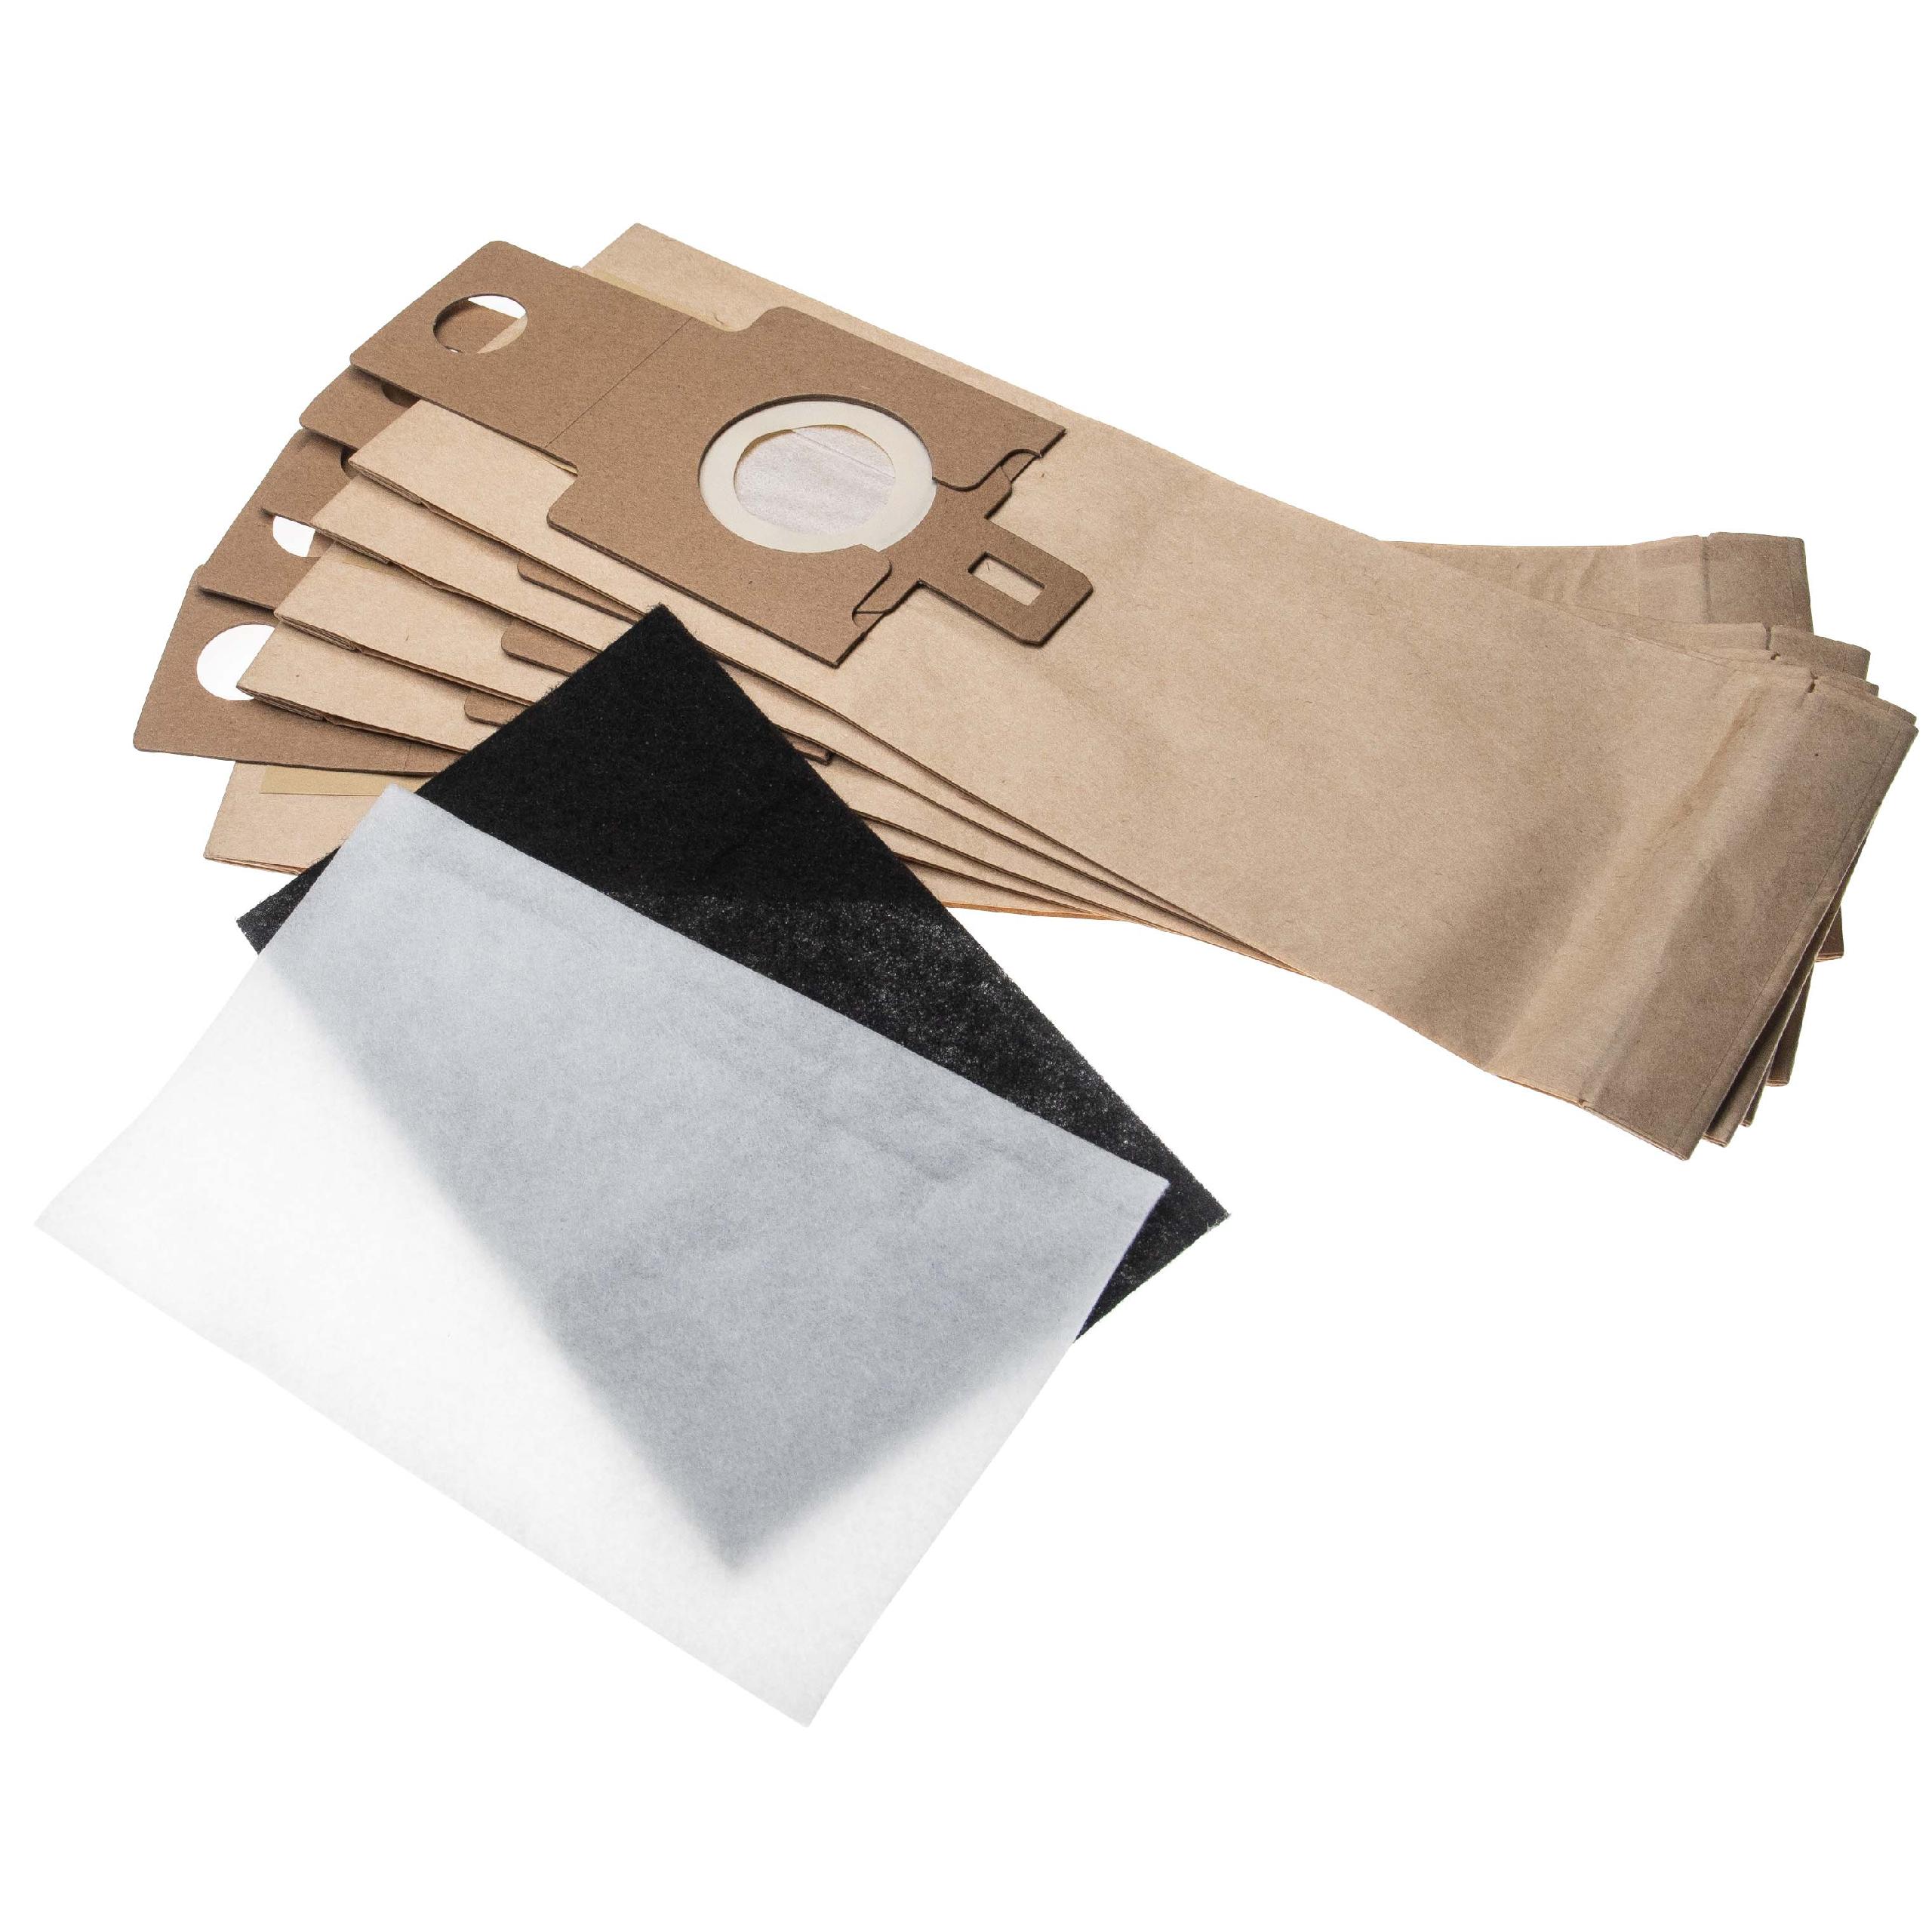 12-Part Filter + Paper Bag Set replaces Hoover H20A, 9162280 for Hanseatic Vacuum Cleaner